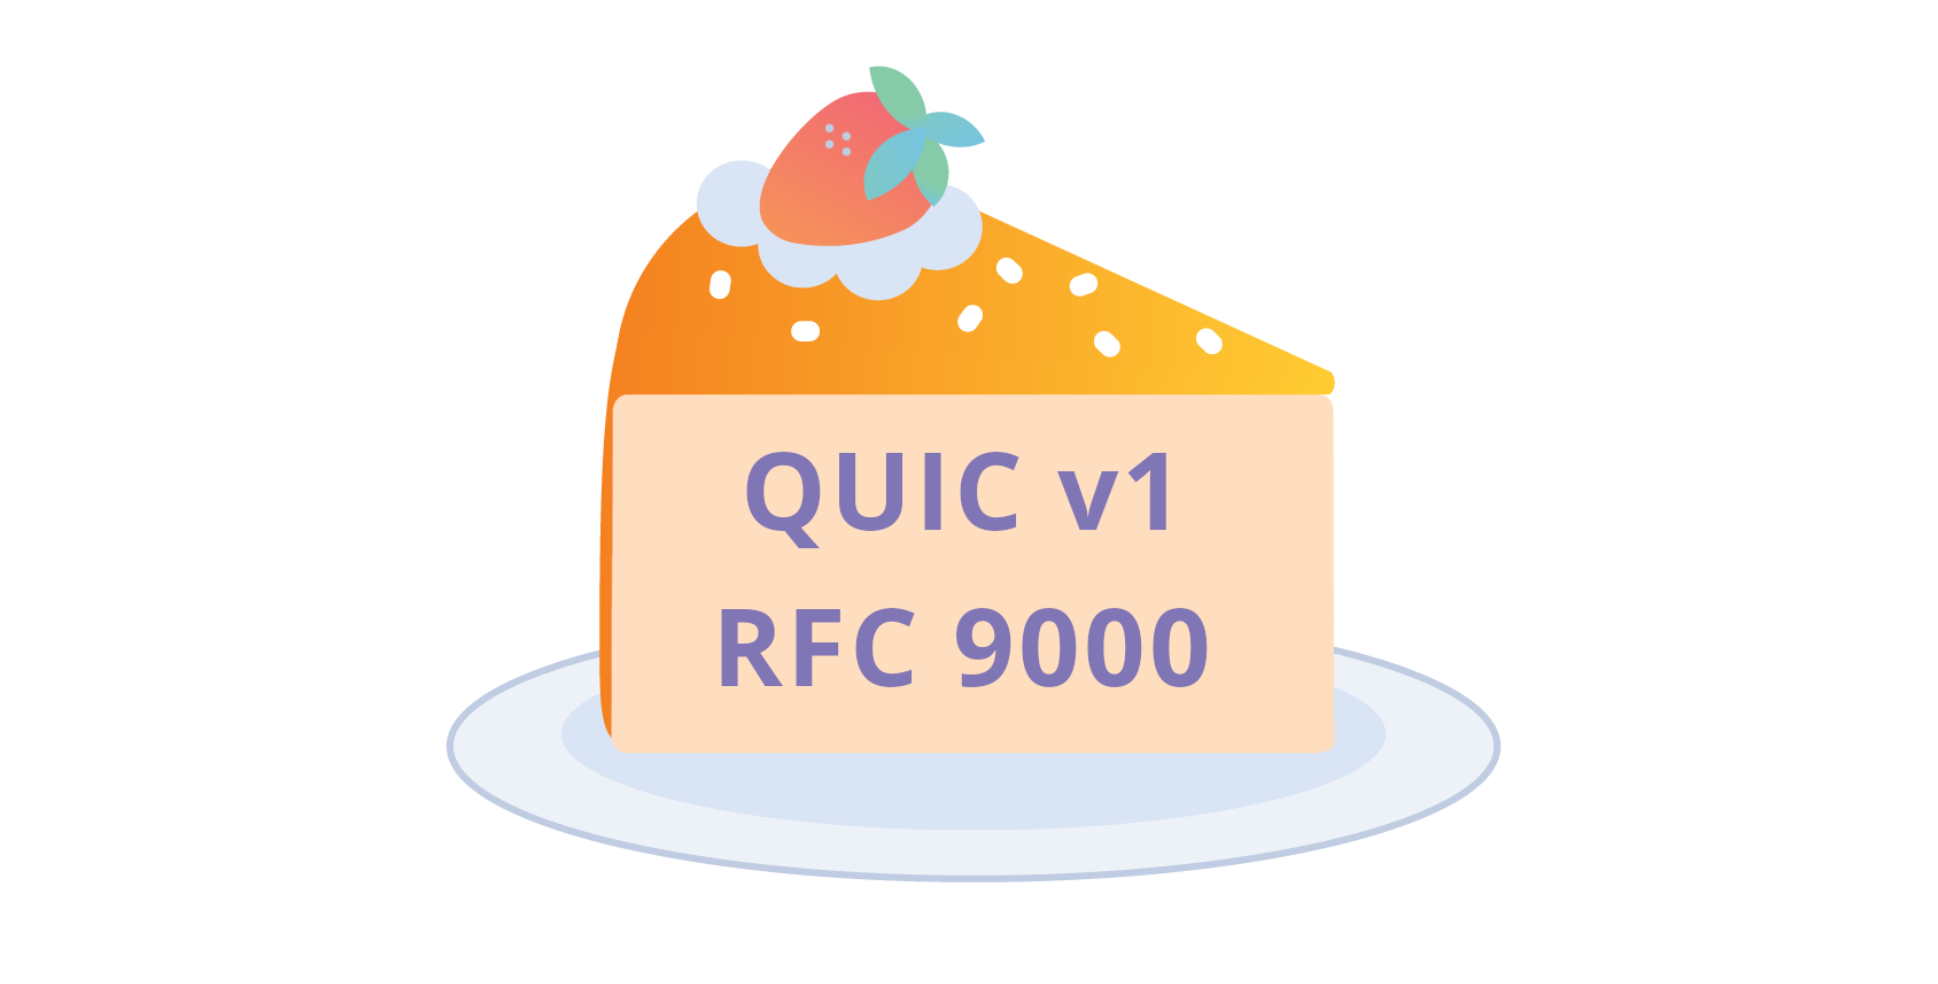 On May 27 2021, the Internet Engineering Task Force published RFC 9000 - the standardarized version of the QUIC transport protocol. The QUIC Working G